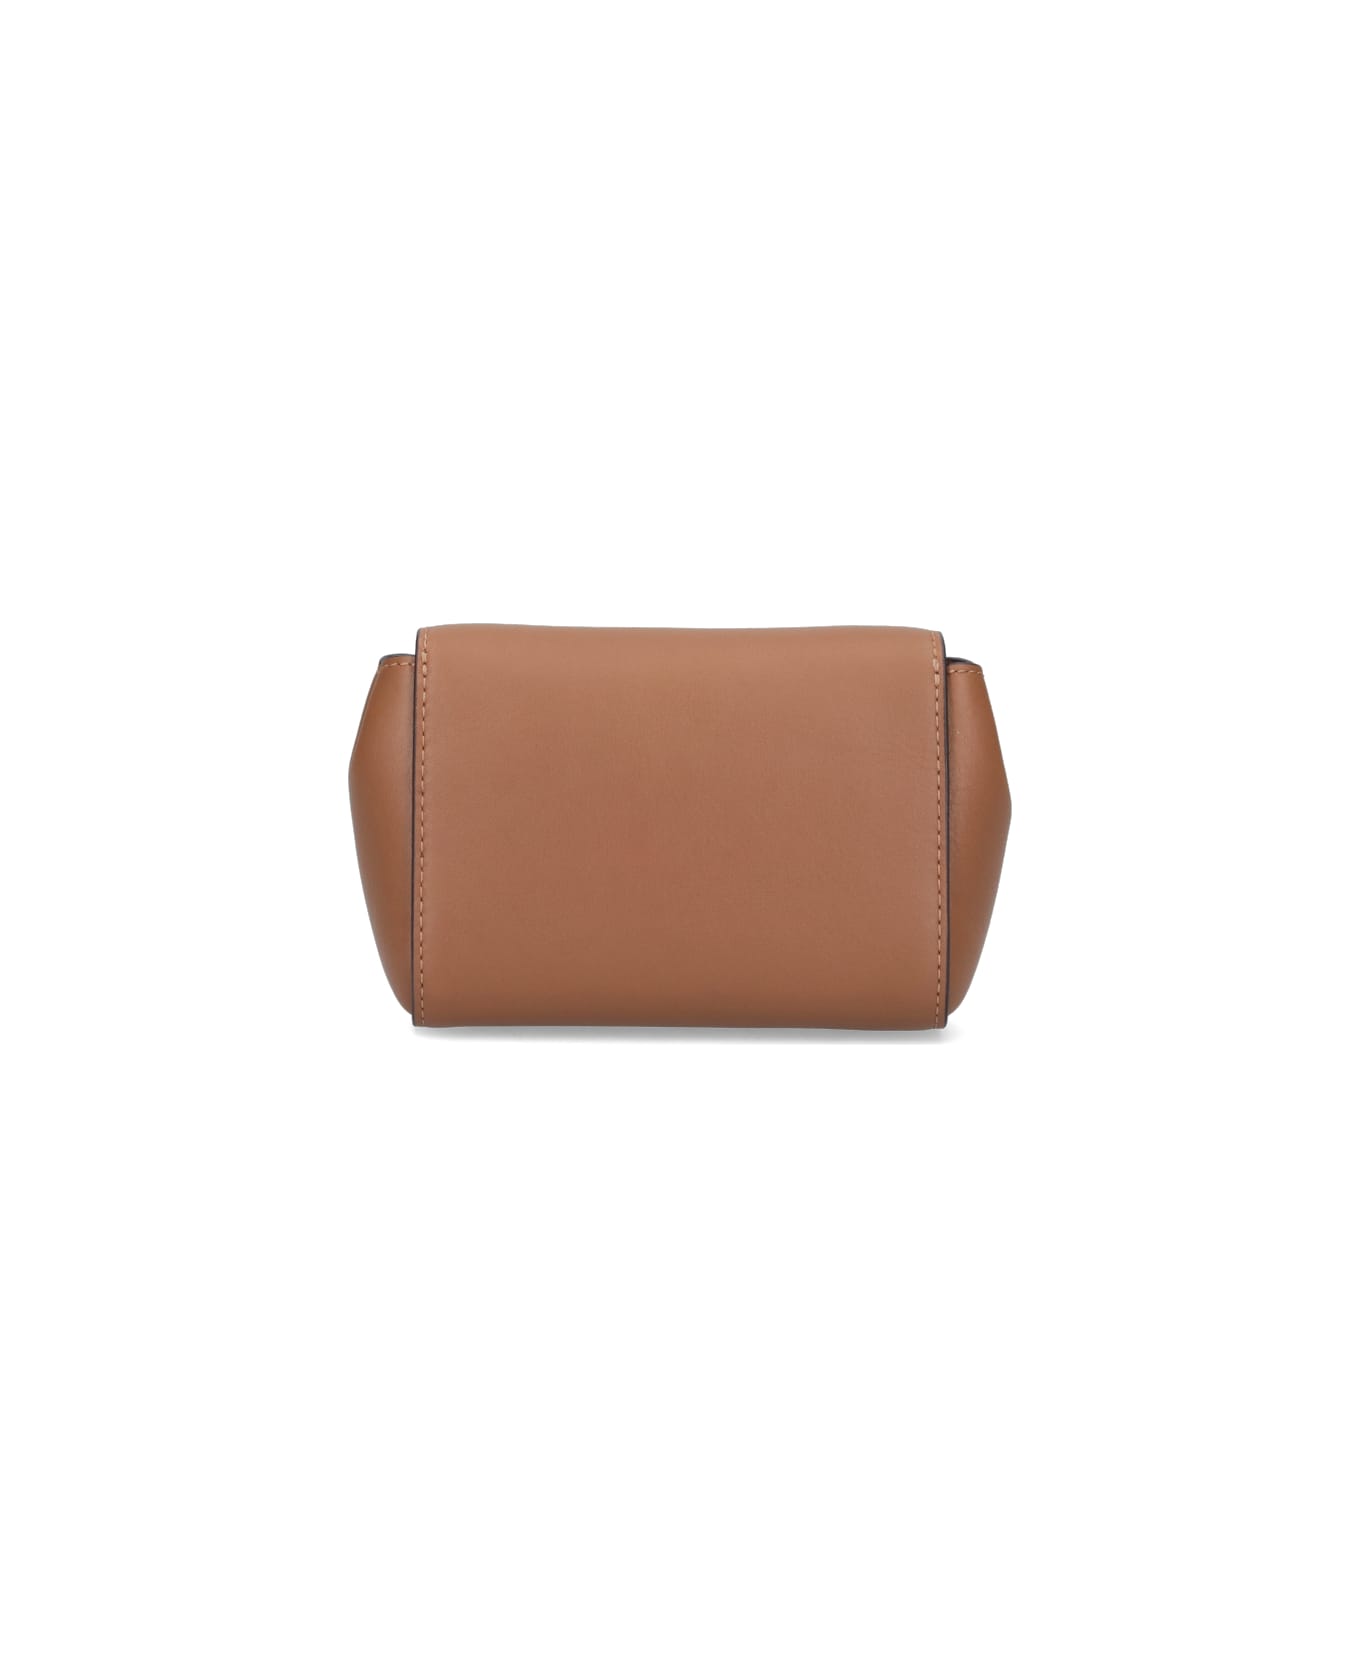 Mulberry "mini Lily" Bag - Brown バッグ